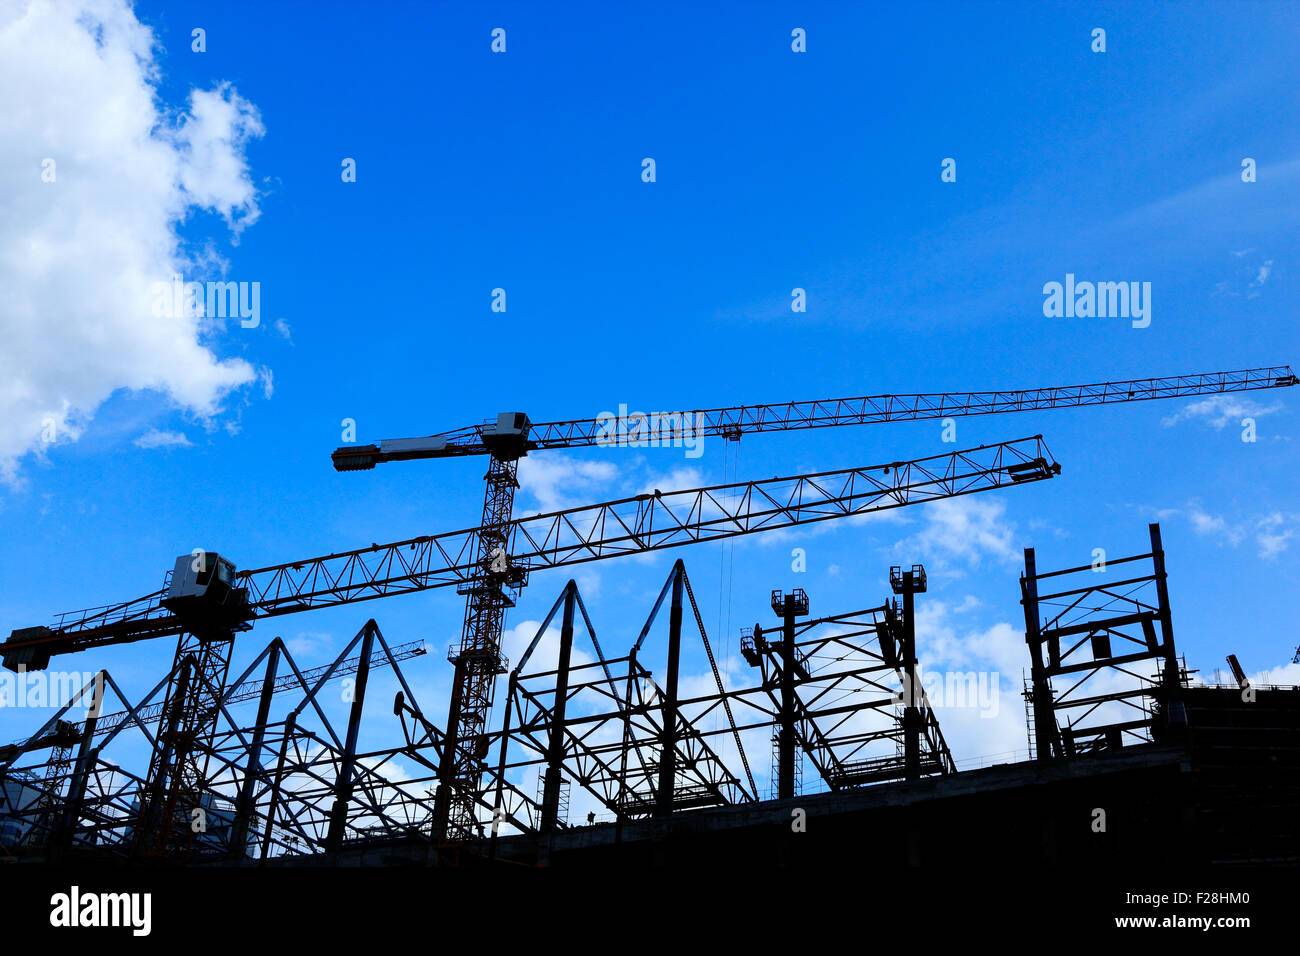 Cranes on construction site silhouette against blue sky. Stock Photo